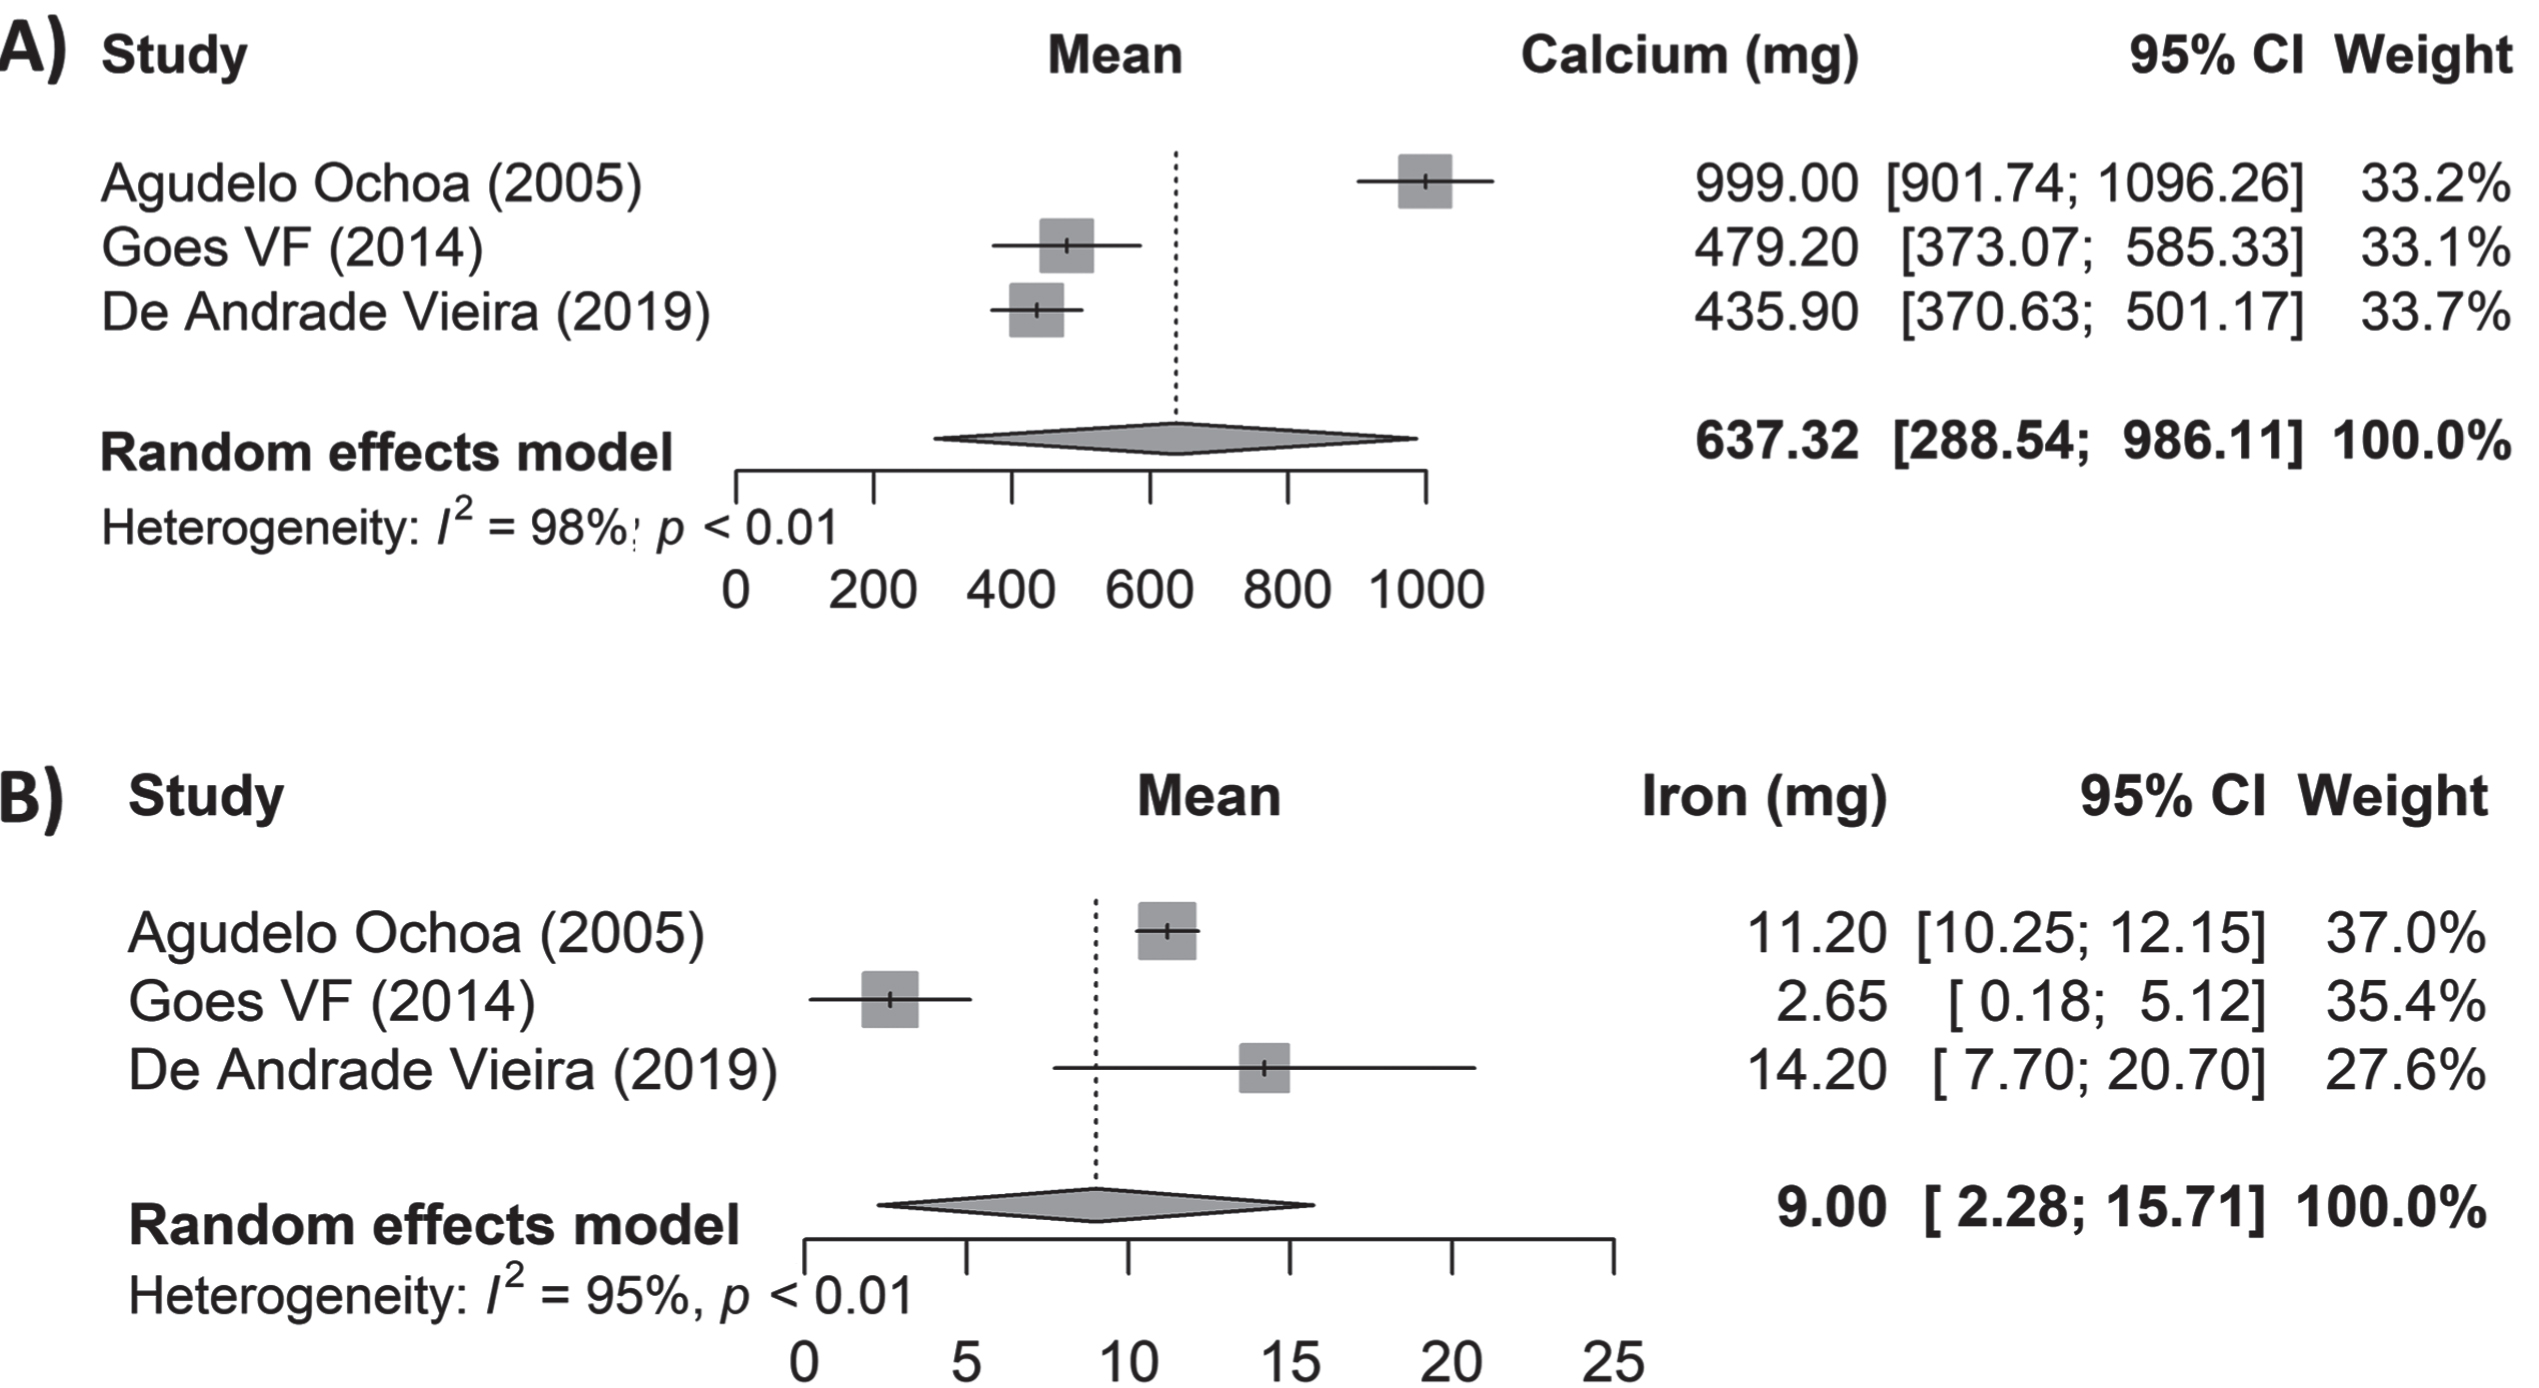 Daily intake of calcium and iron in subjects with MCI and dementia in LAC.